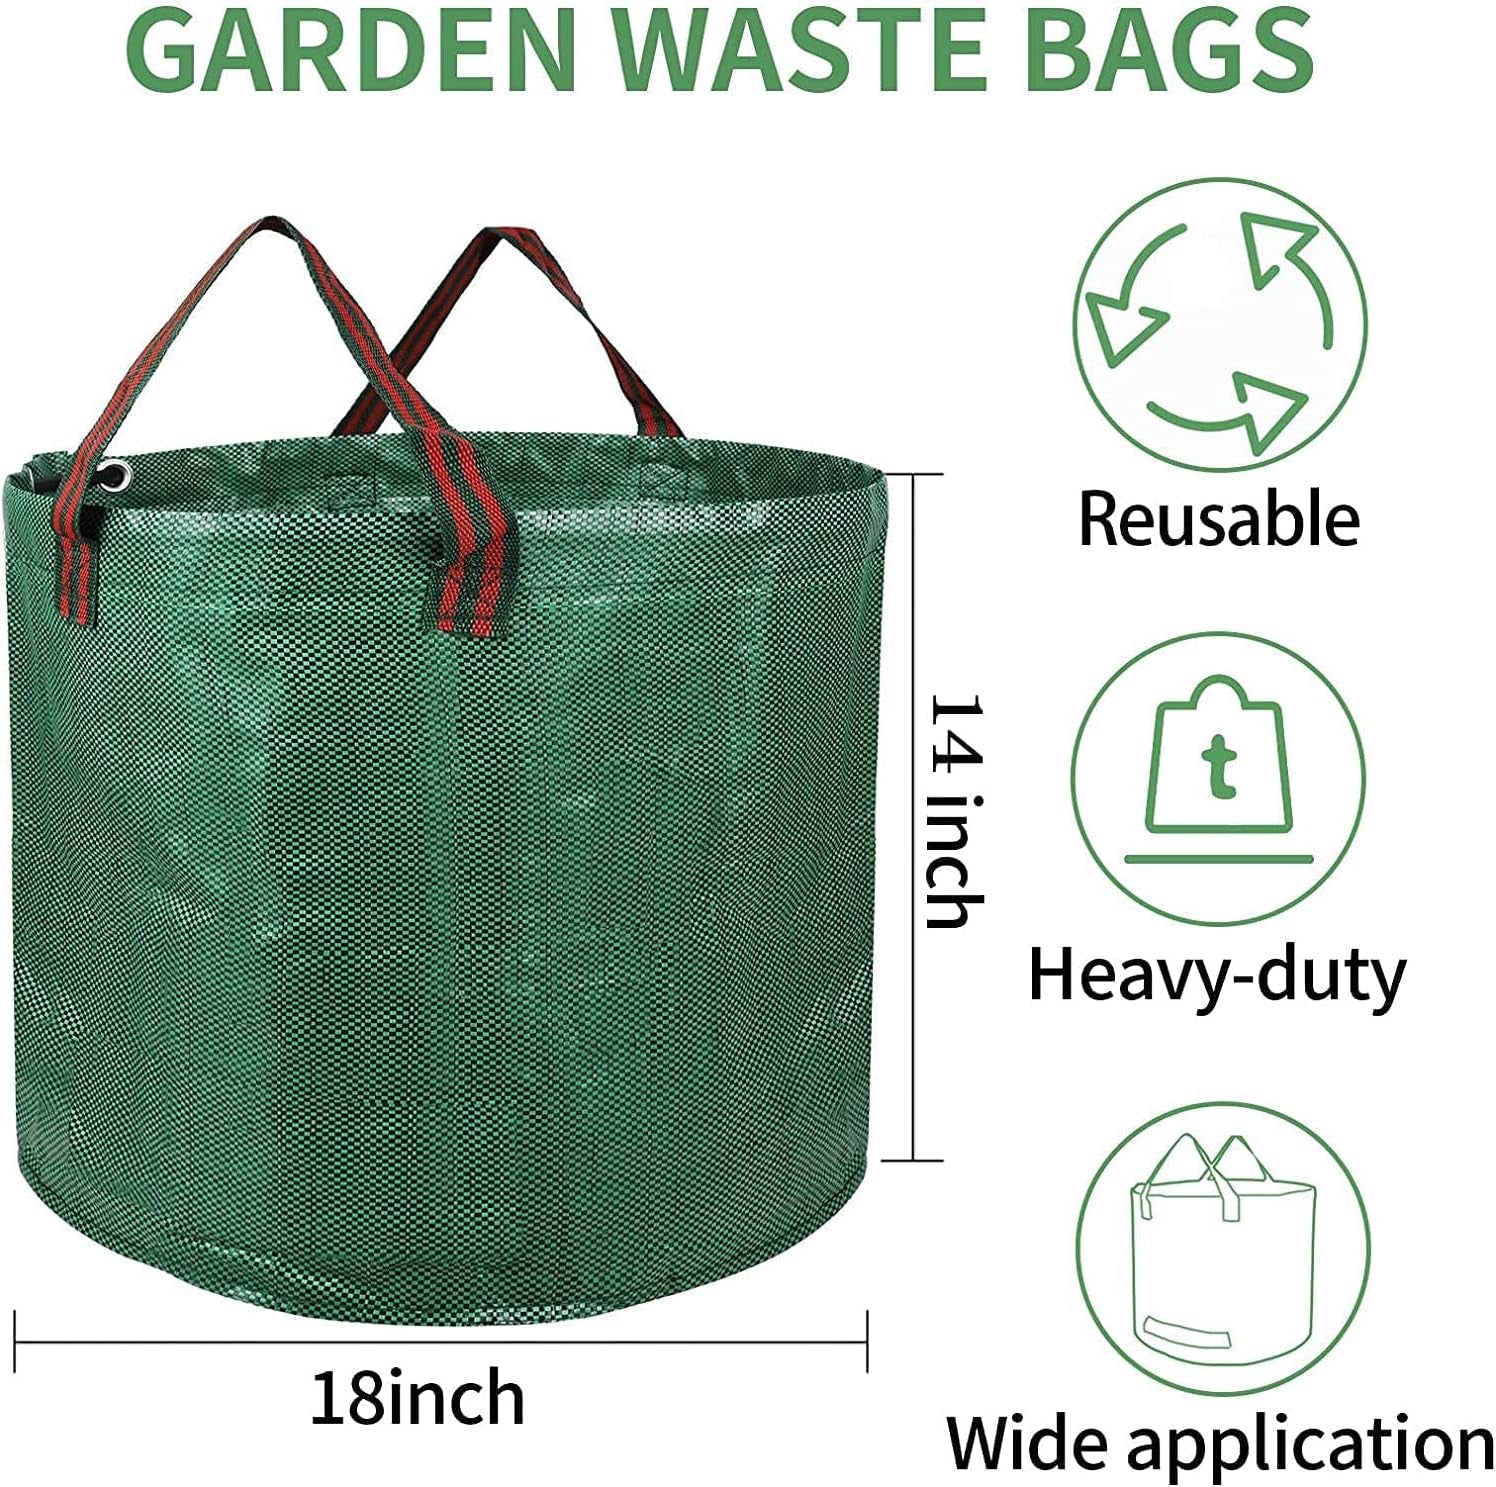 16-Gallon 3-Pack Lawn Garden Leaf Waste Bags, Heavy Duty Reusable Standable with Handles for Patio, Yard, Laundry Container and Trash Can, Sturdy Thickened PE Green Color